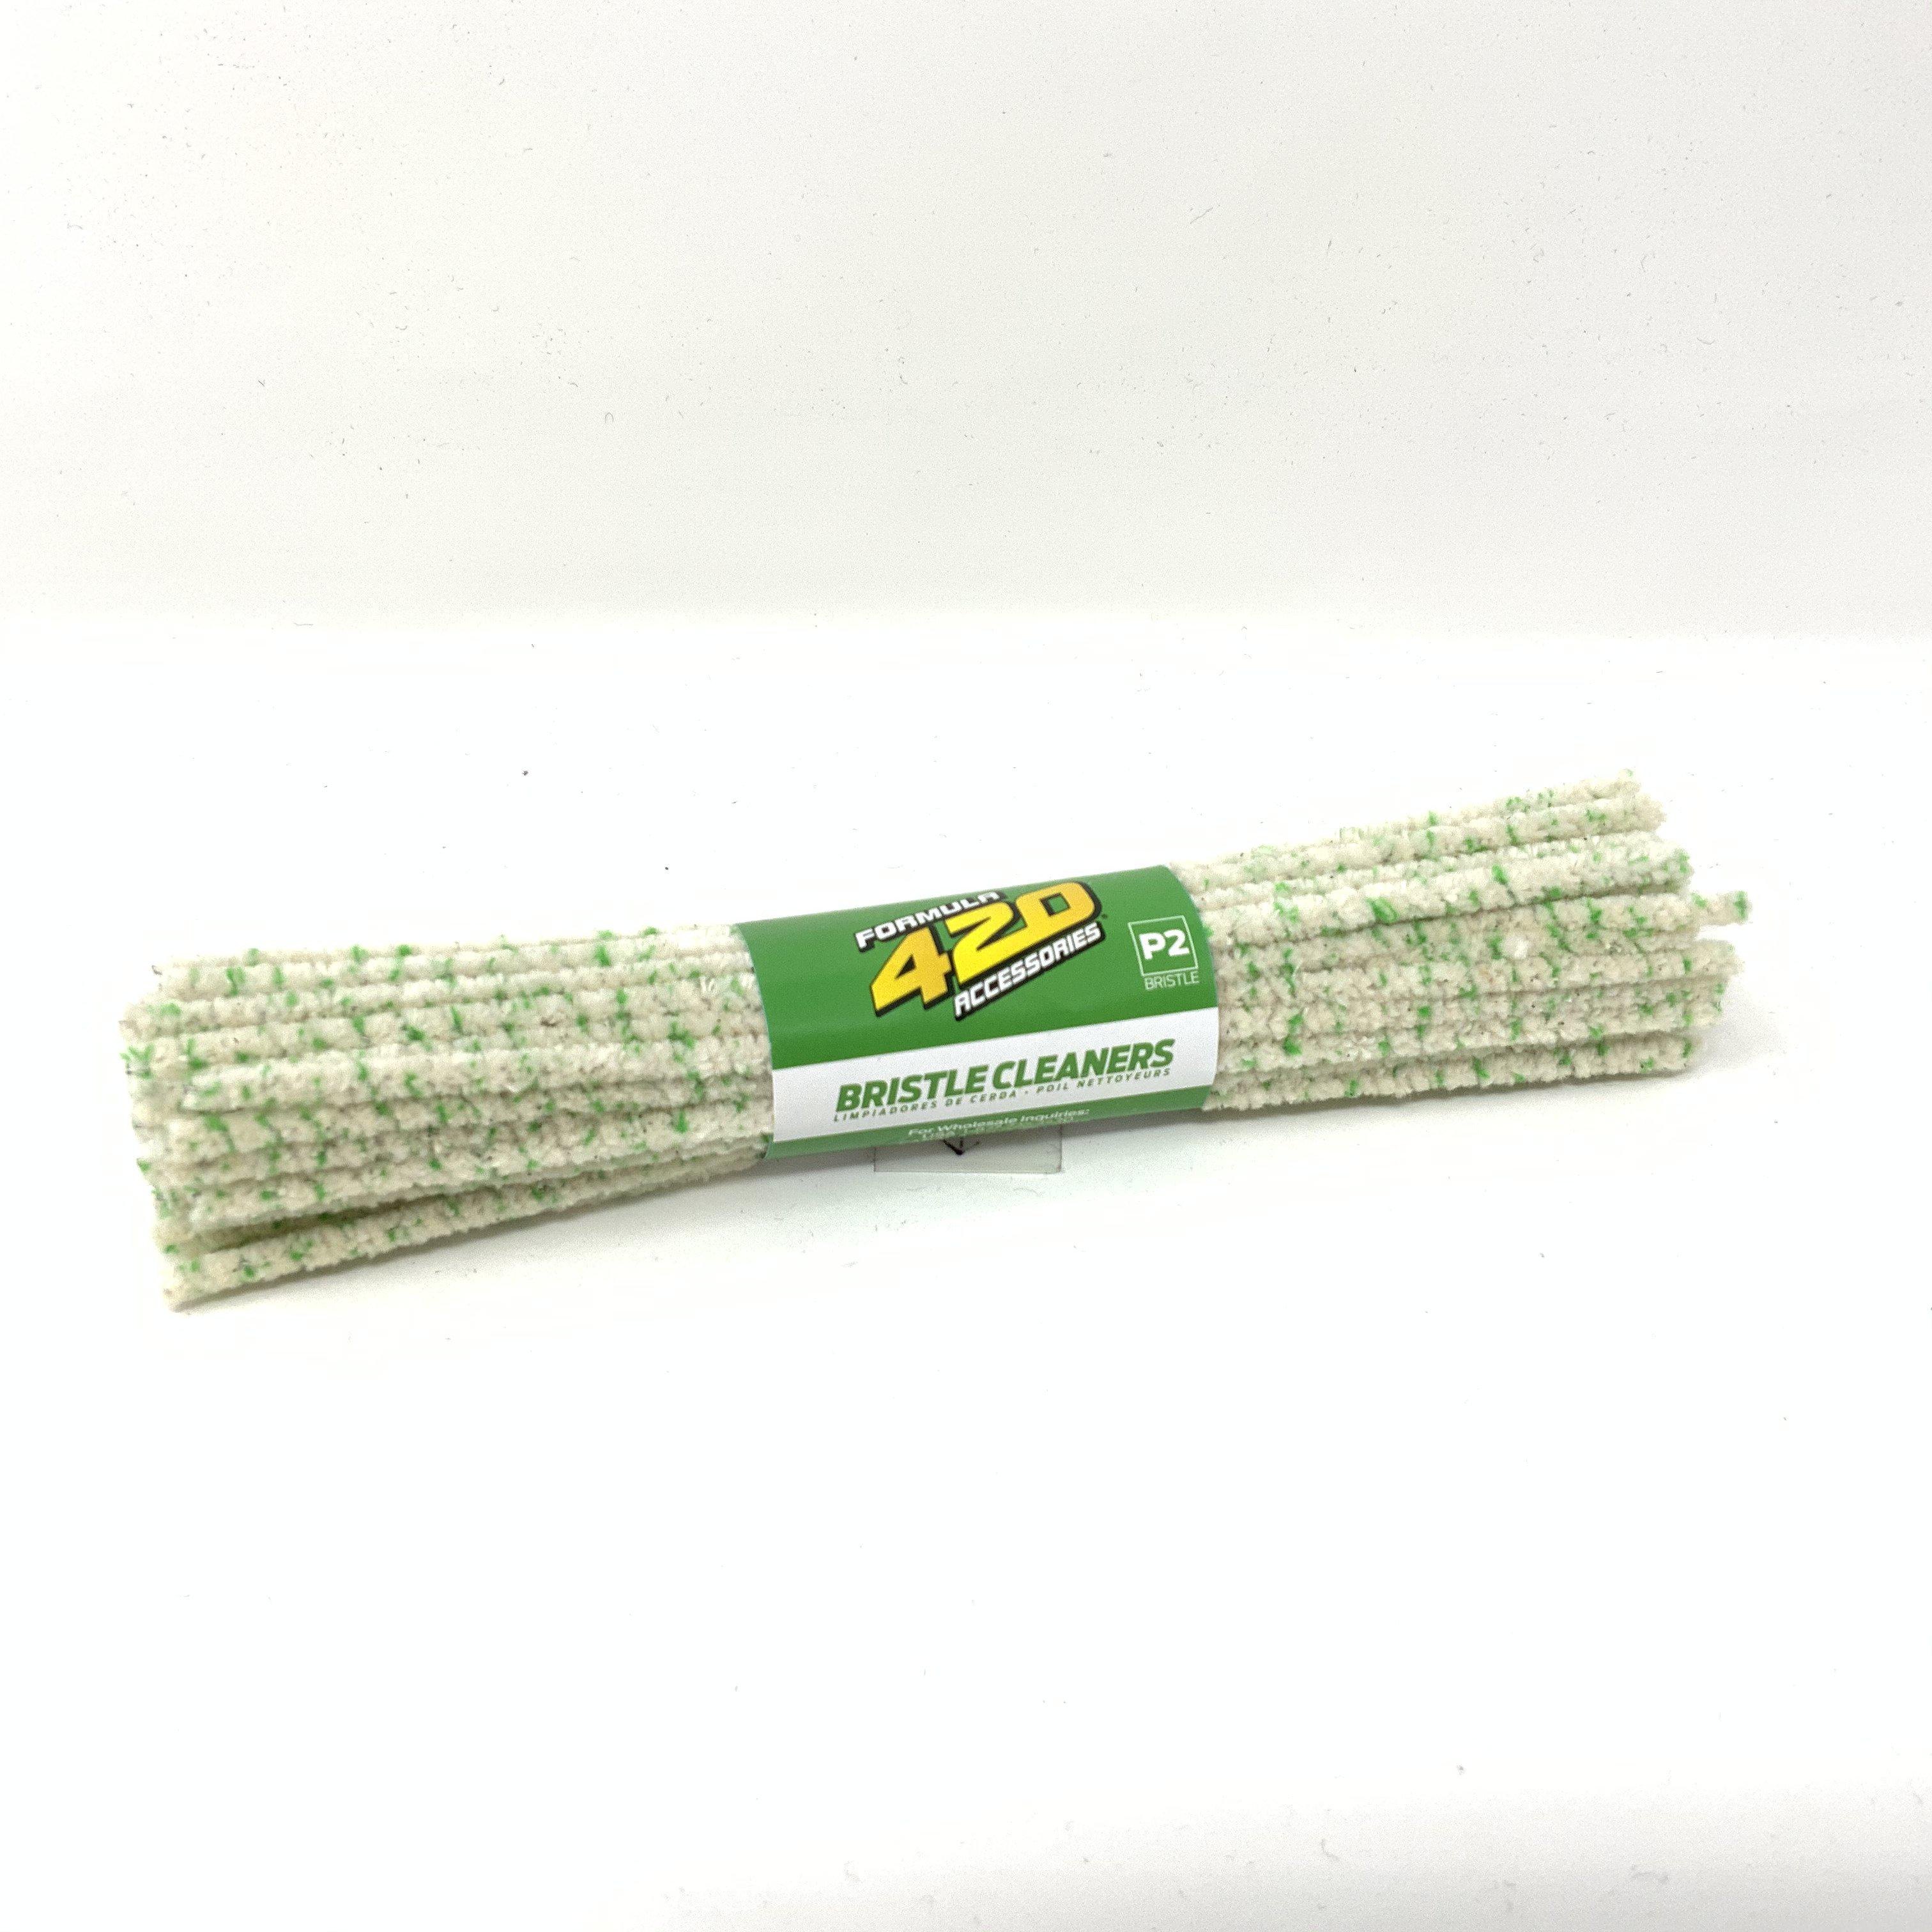 30 Count Bristled Pipe Cleaners